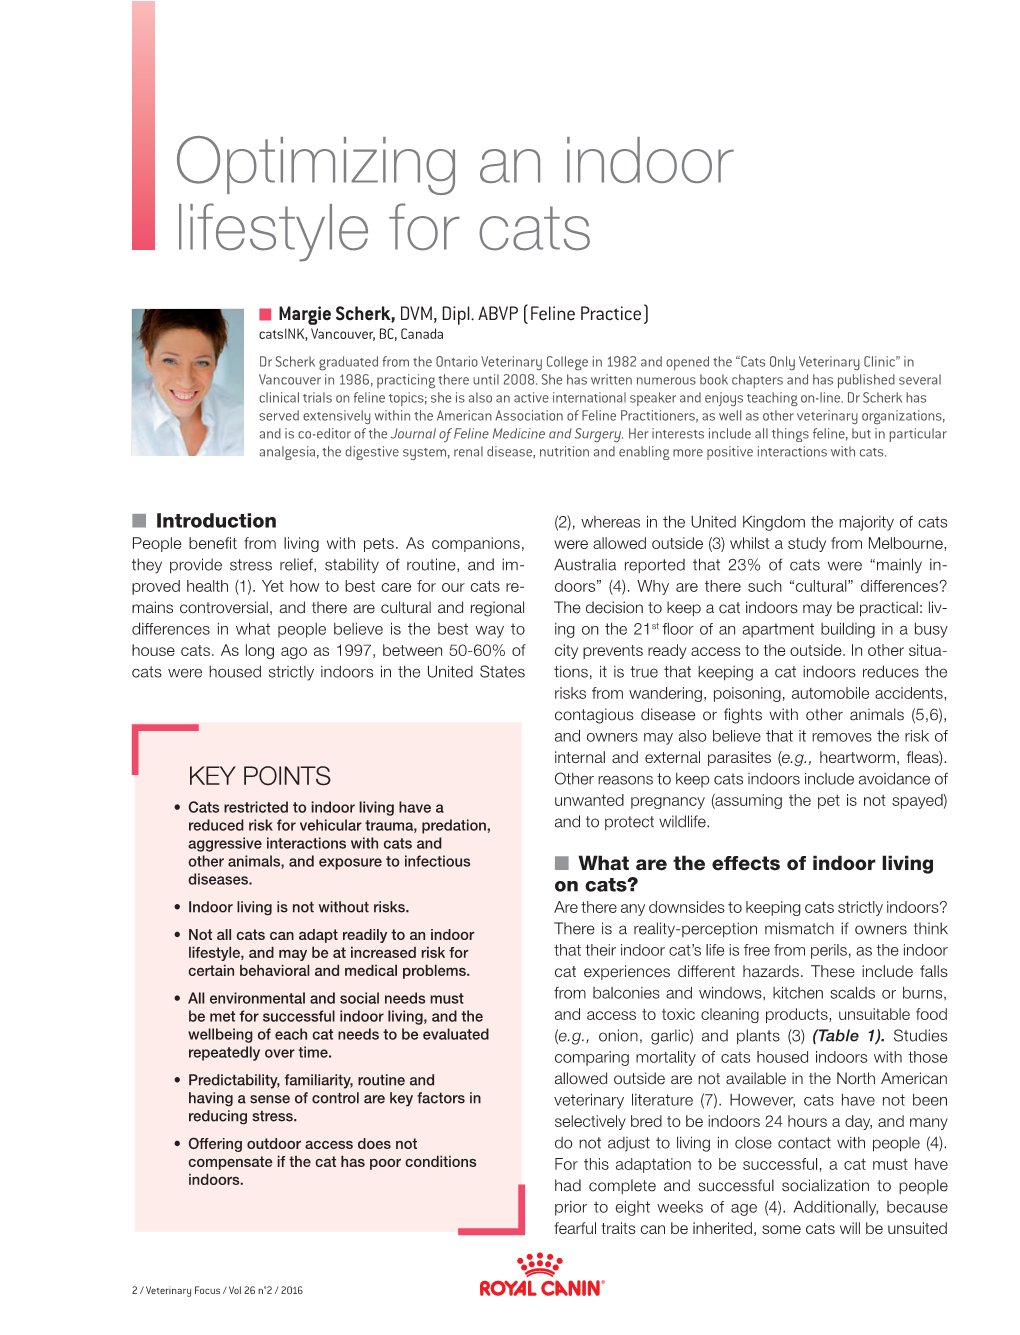 Optimizing an Indoor Lifestyle for Cats